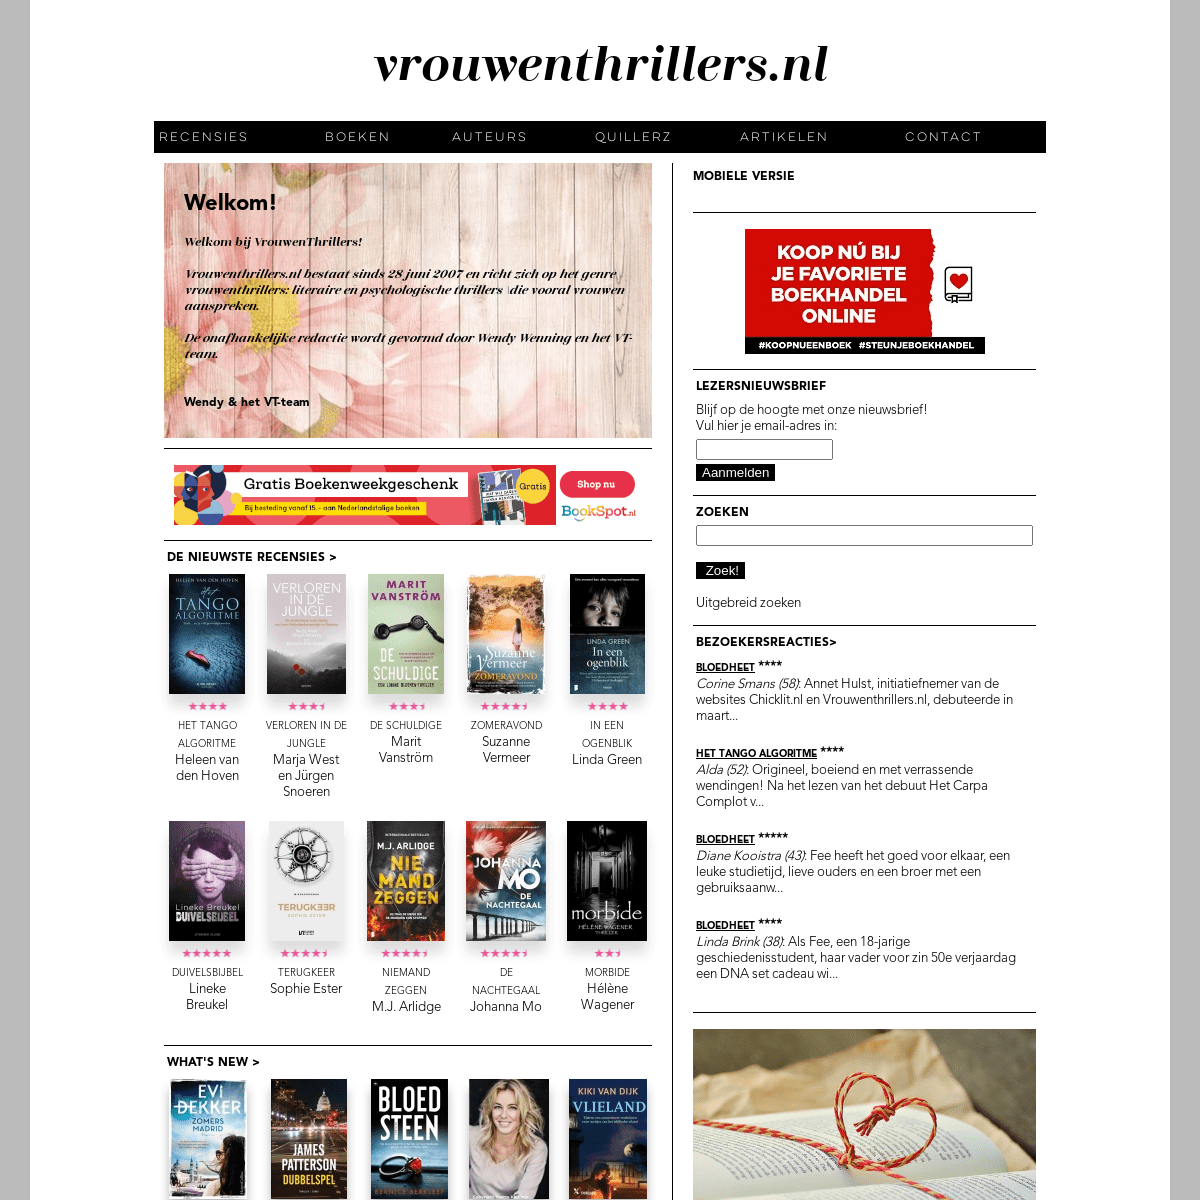 A complete backup of https://vrouwenthrillers.nl